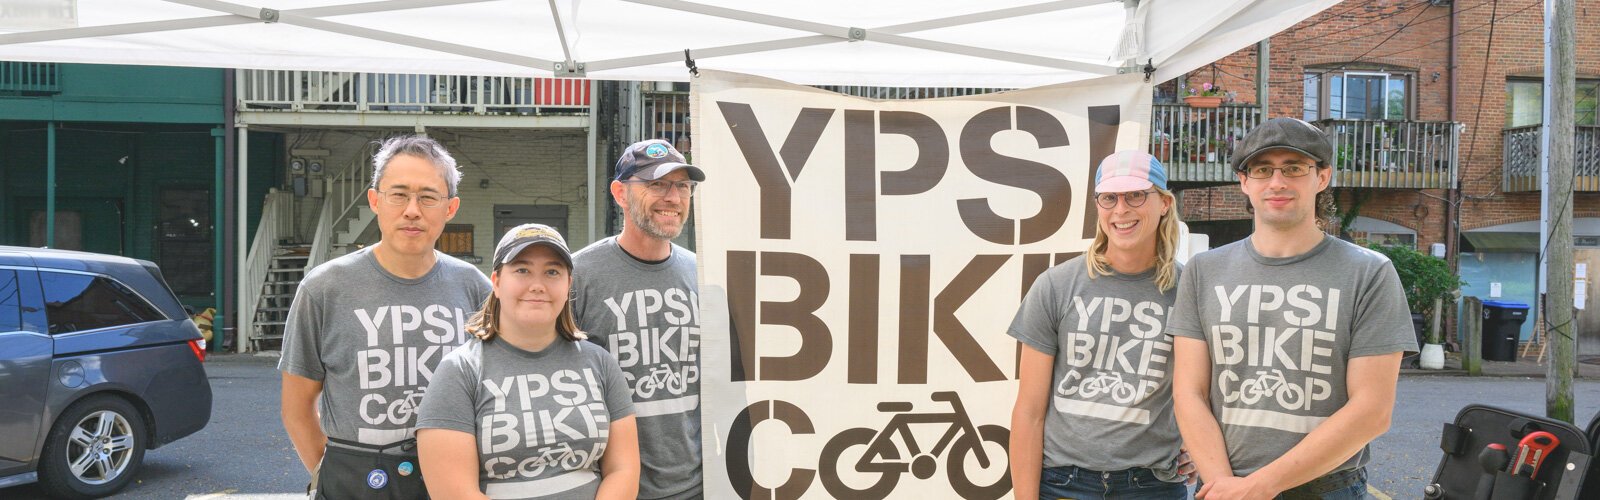  Yitah Wu, Emma Nelson, Terry Carpenter, Valerie Fox, and Anthony Lutz at the Ypsi Bike Co-op's booth at Ypsilanti's Depot Town farmers market.